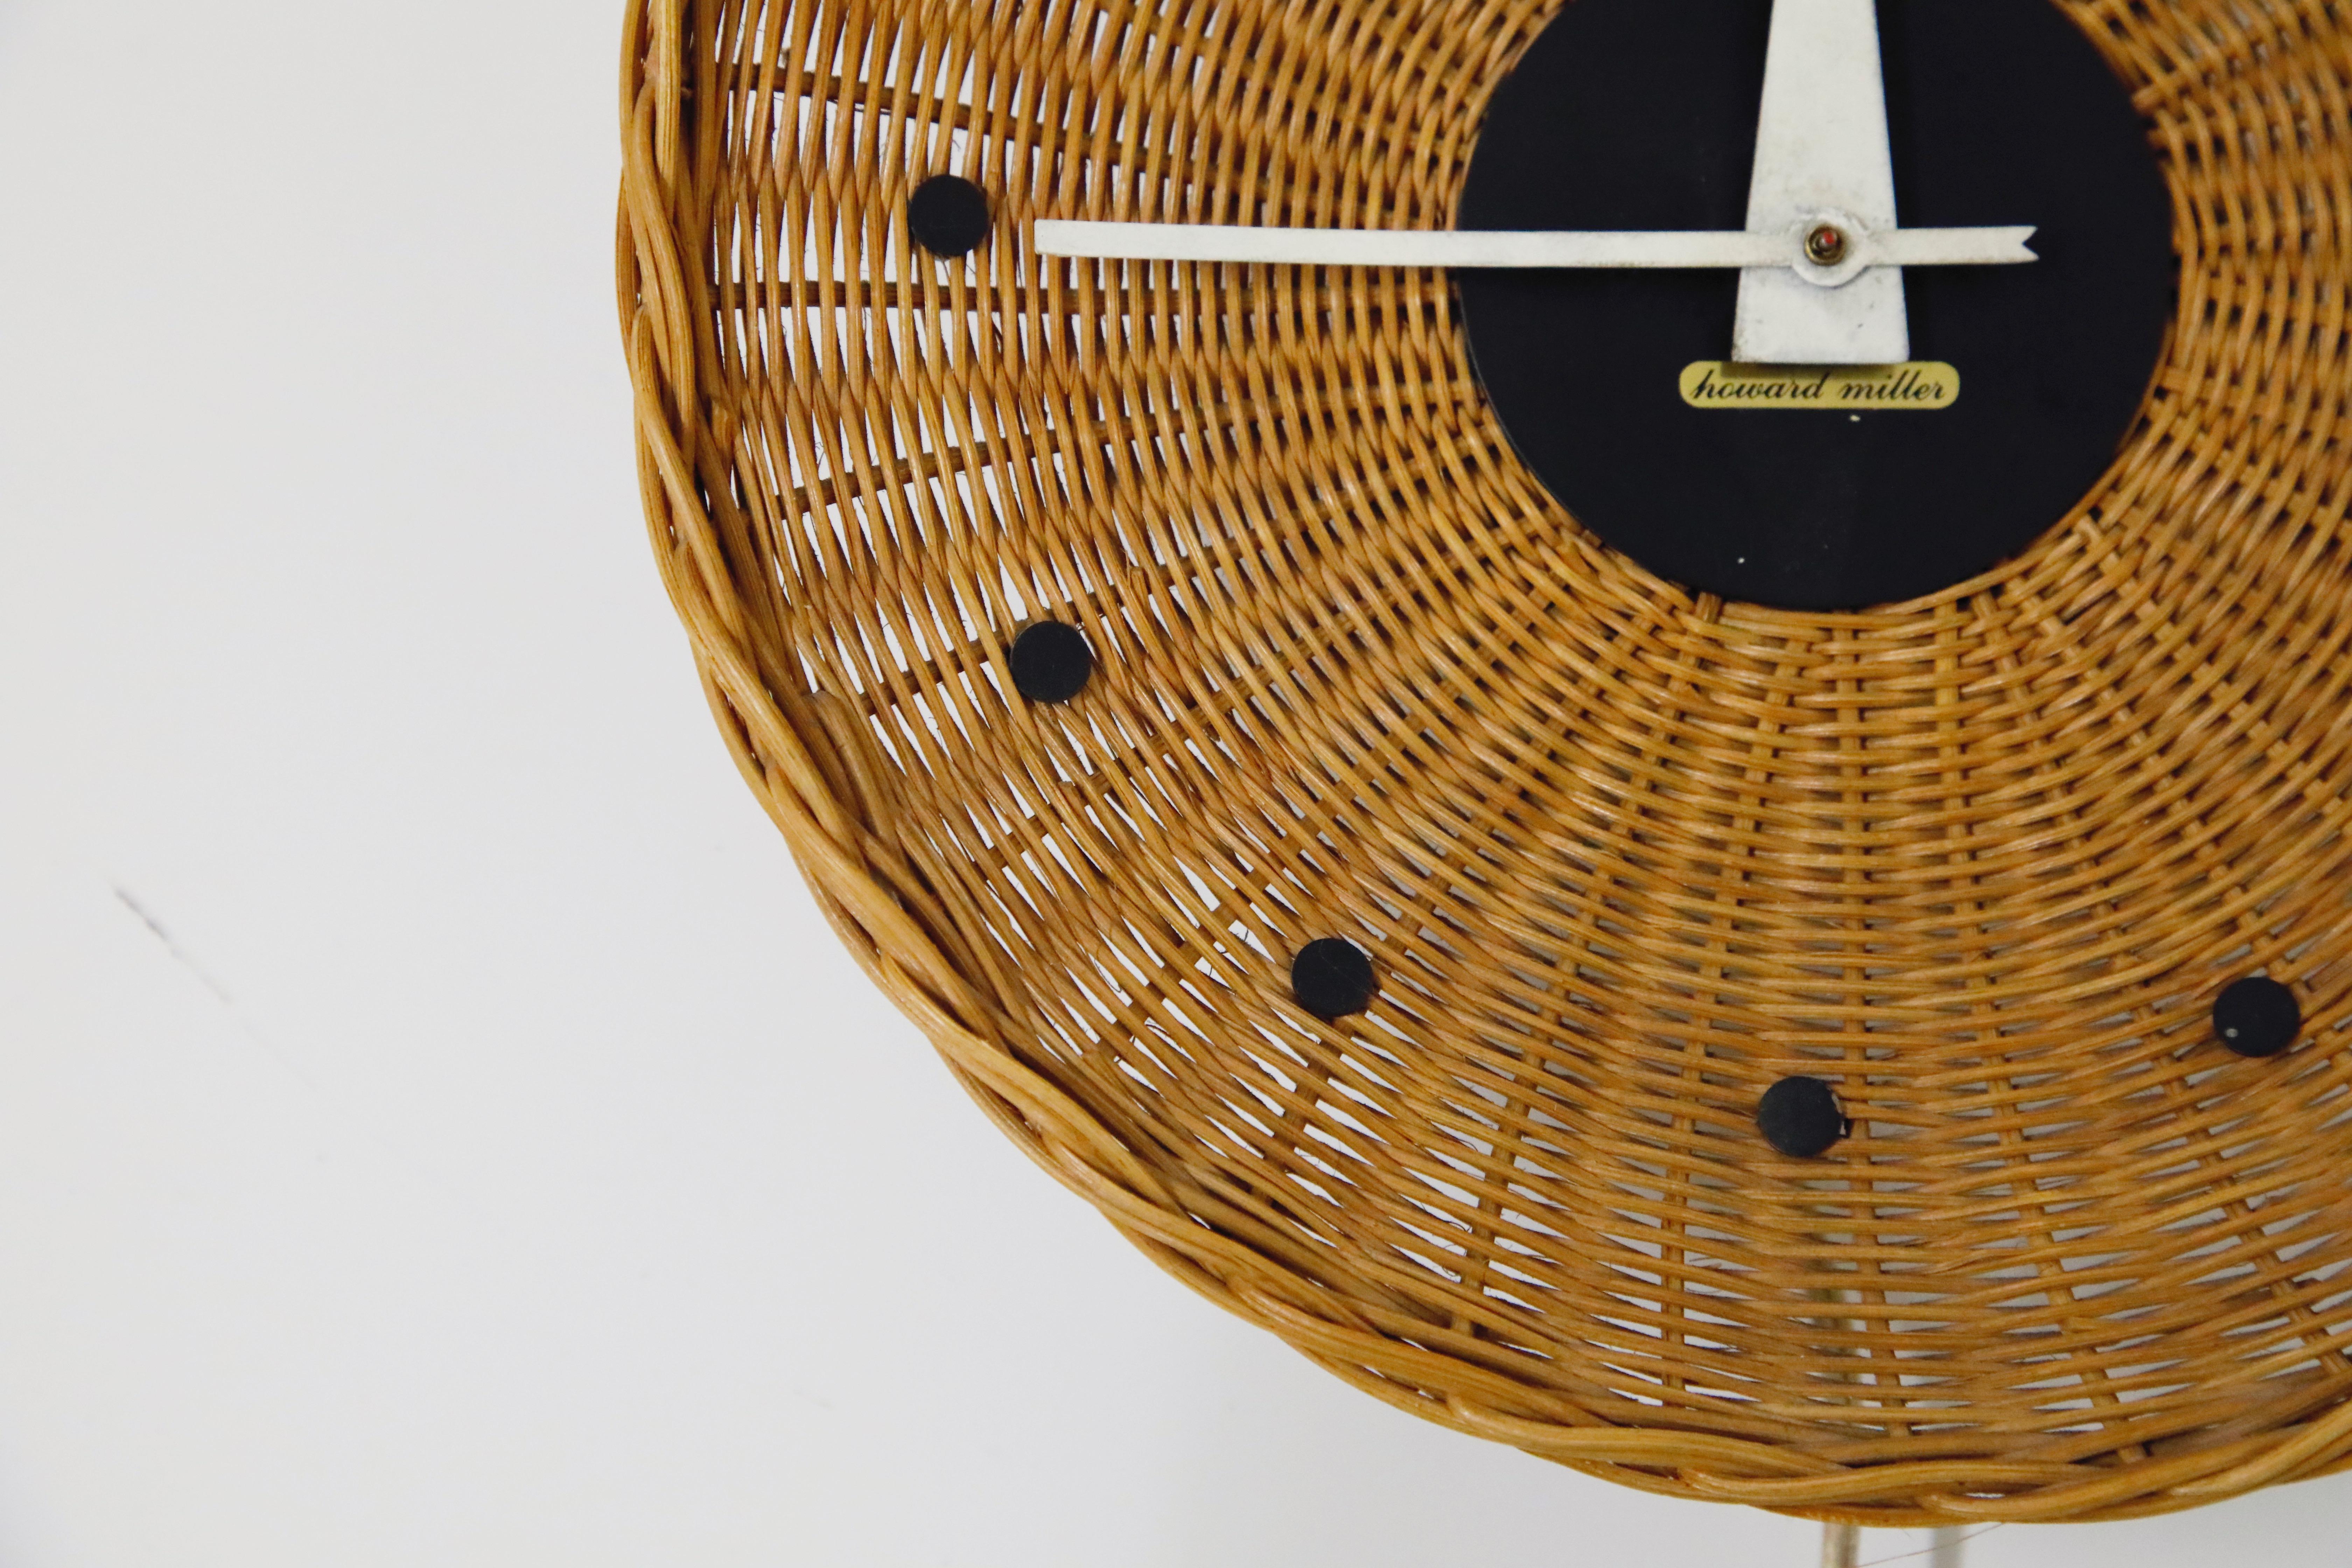 Mid-Century Modern Woven Rattan 'Basket Clock' by George Nelson for Howard Miller, 1950s, Rare